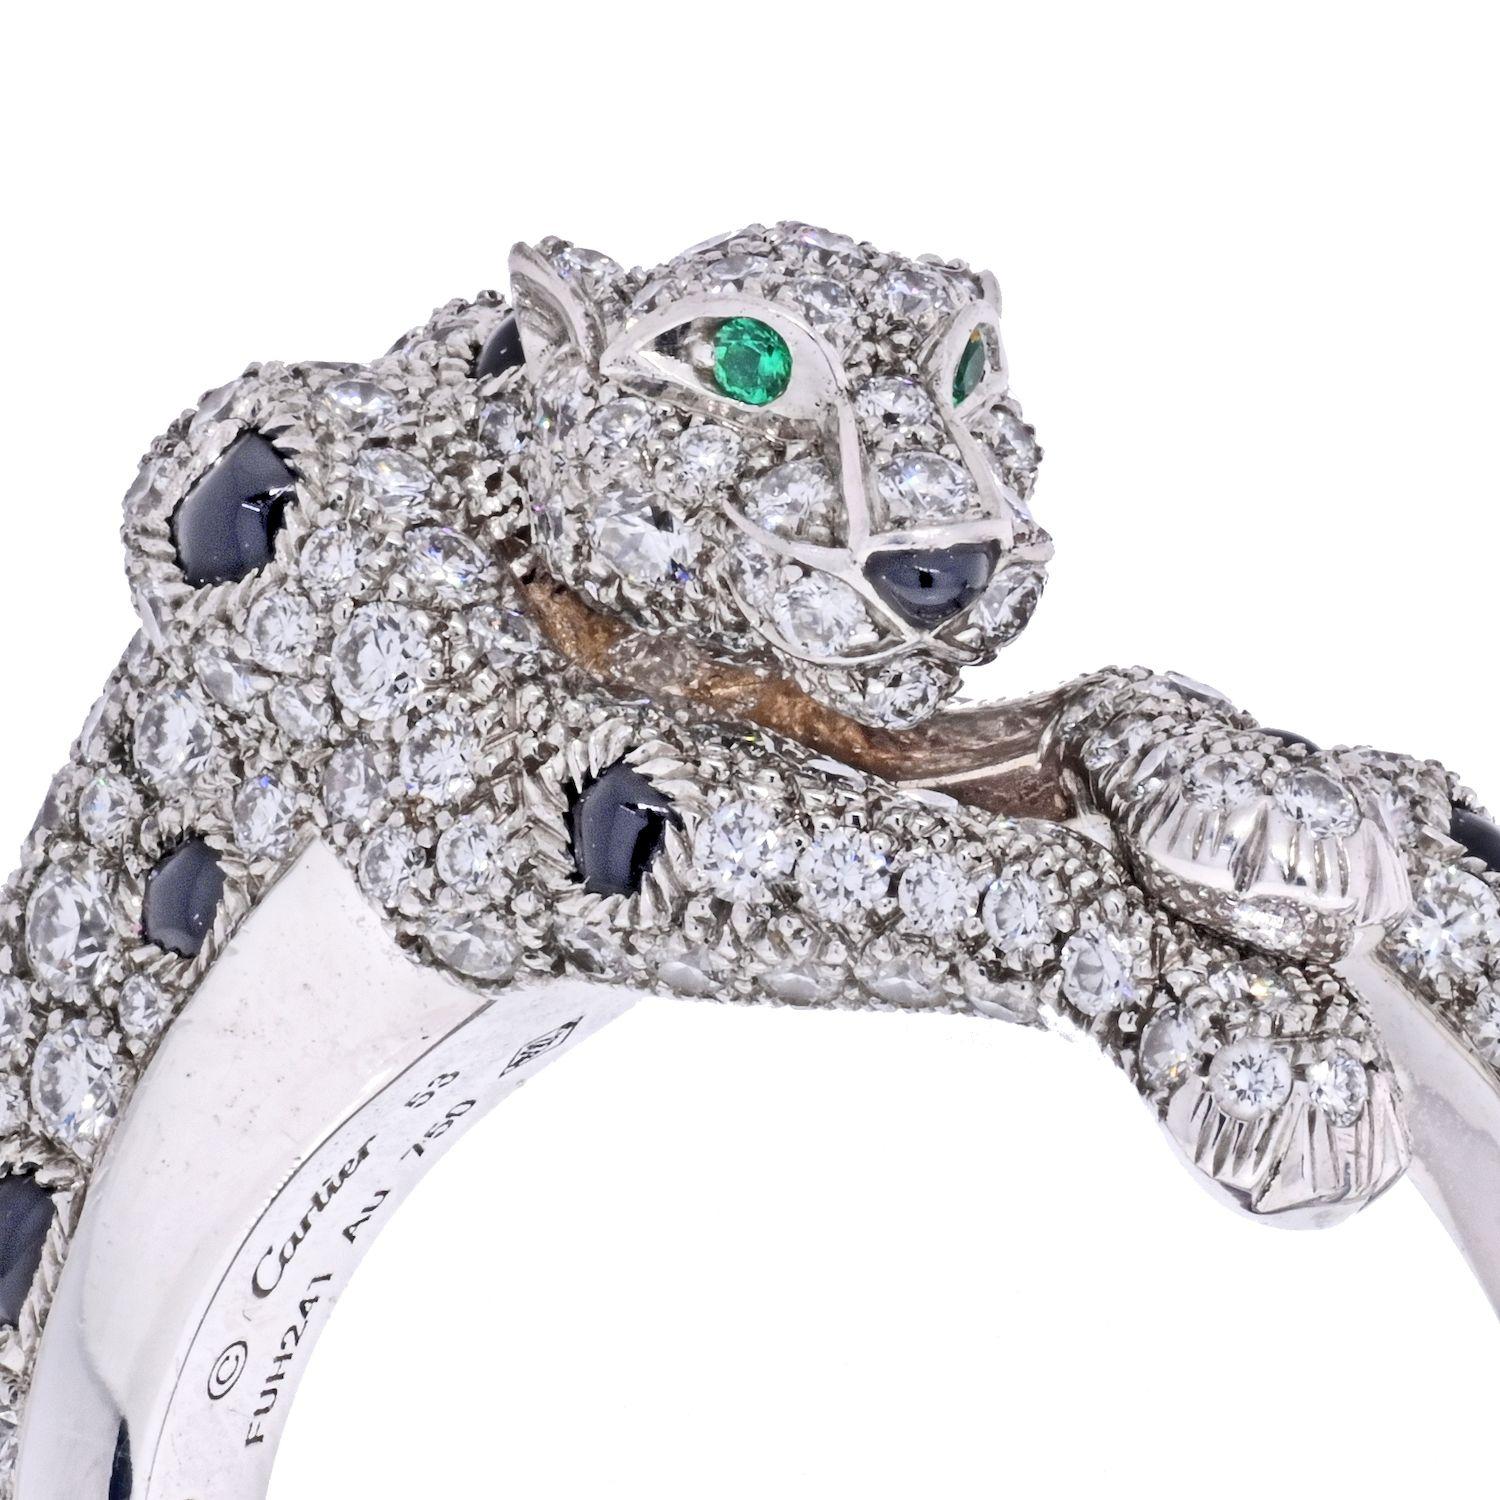 Panthere de Cartier ring in 18K white gold. Detailed with gleaming emeralds for eyes and sparkling diamonds and onyx stones depicting its majestic coat. 264 brilliant-cut diamonds totaling 1.66 carat. Width of the pattern: 8.7 mm. 
Ring size 53,